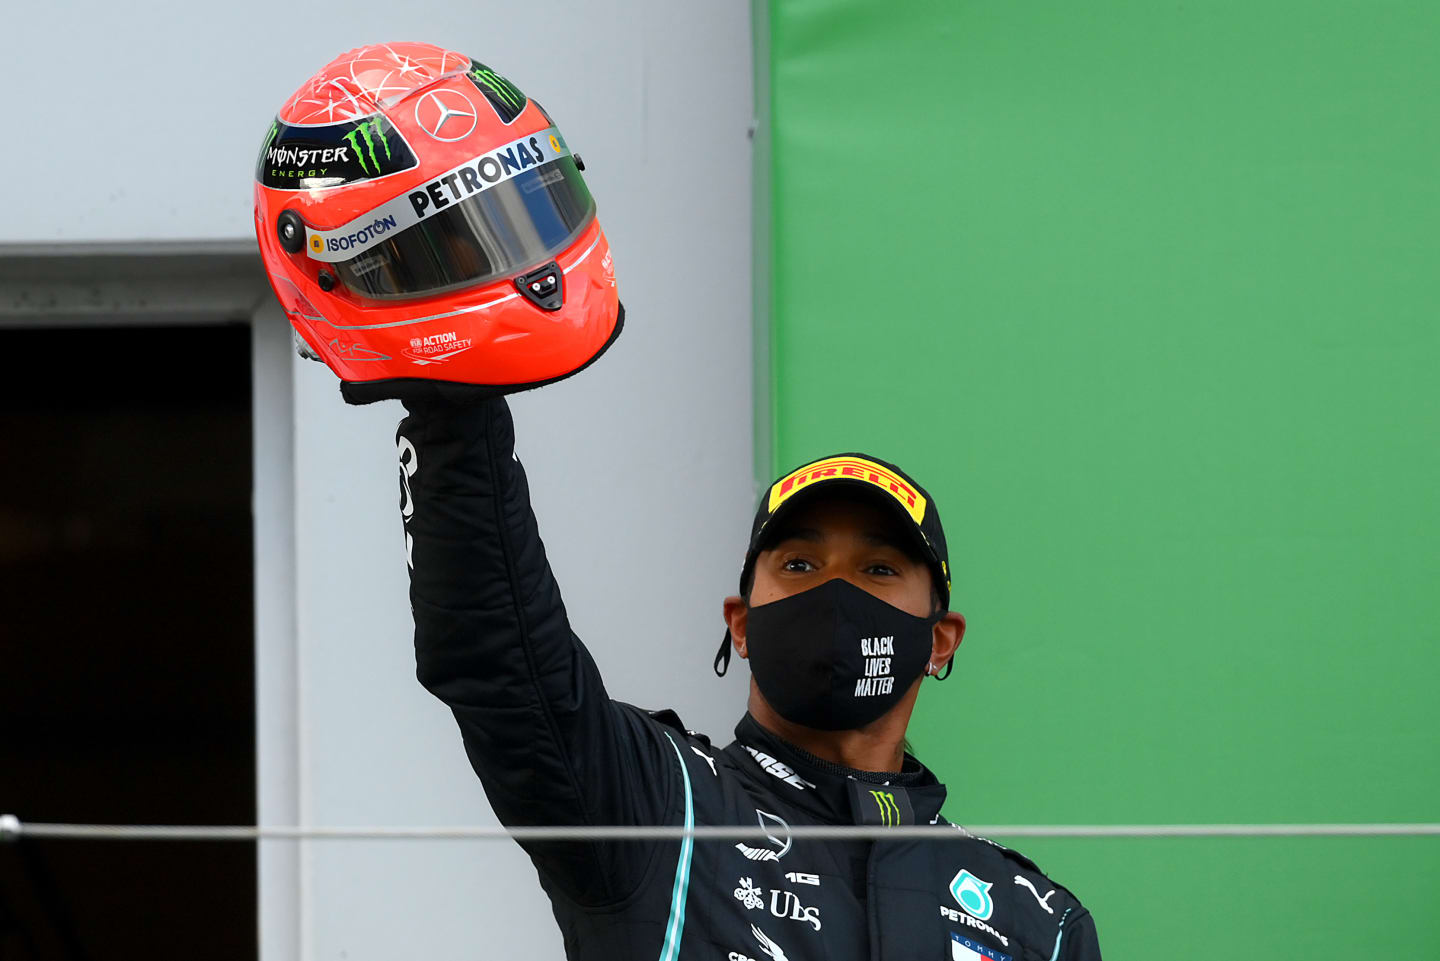 NUERBURG, GERMANY - OCTOBER 11: Race winner Lewis Hamilton of Great Britain and Mercedes GP celebrates after being presented with a helmet of Michael Schumacher for matching his record of 91 race wins during the F1 Eifel Grand Prix at Nuerburgring on October 11, 2020 in Nuerburg, Germany. (Photo by Clive Mason - Formula 1/Formula 1 via Getty Images)